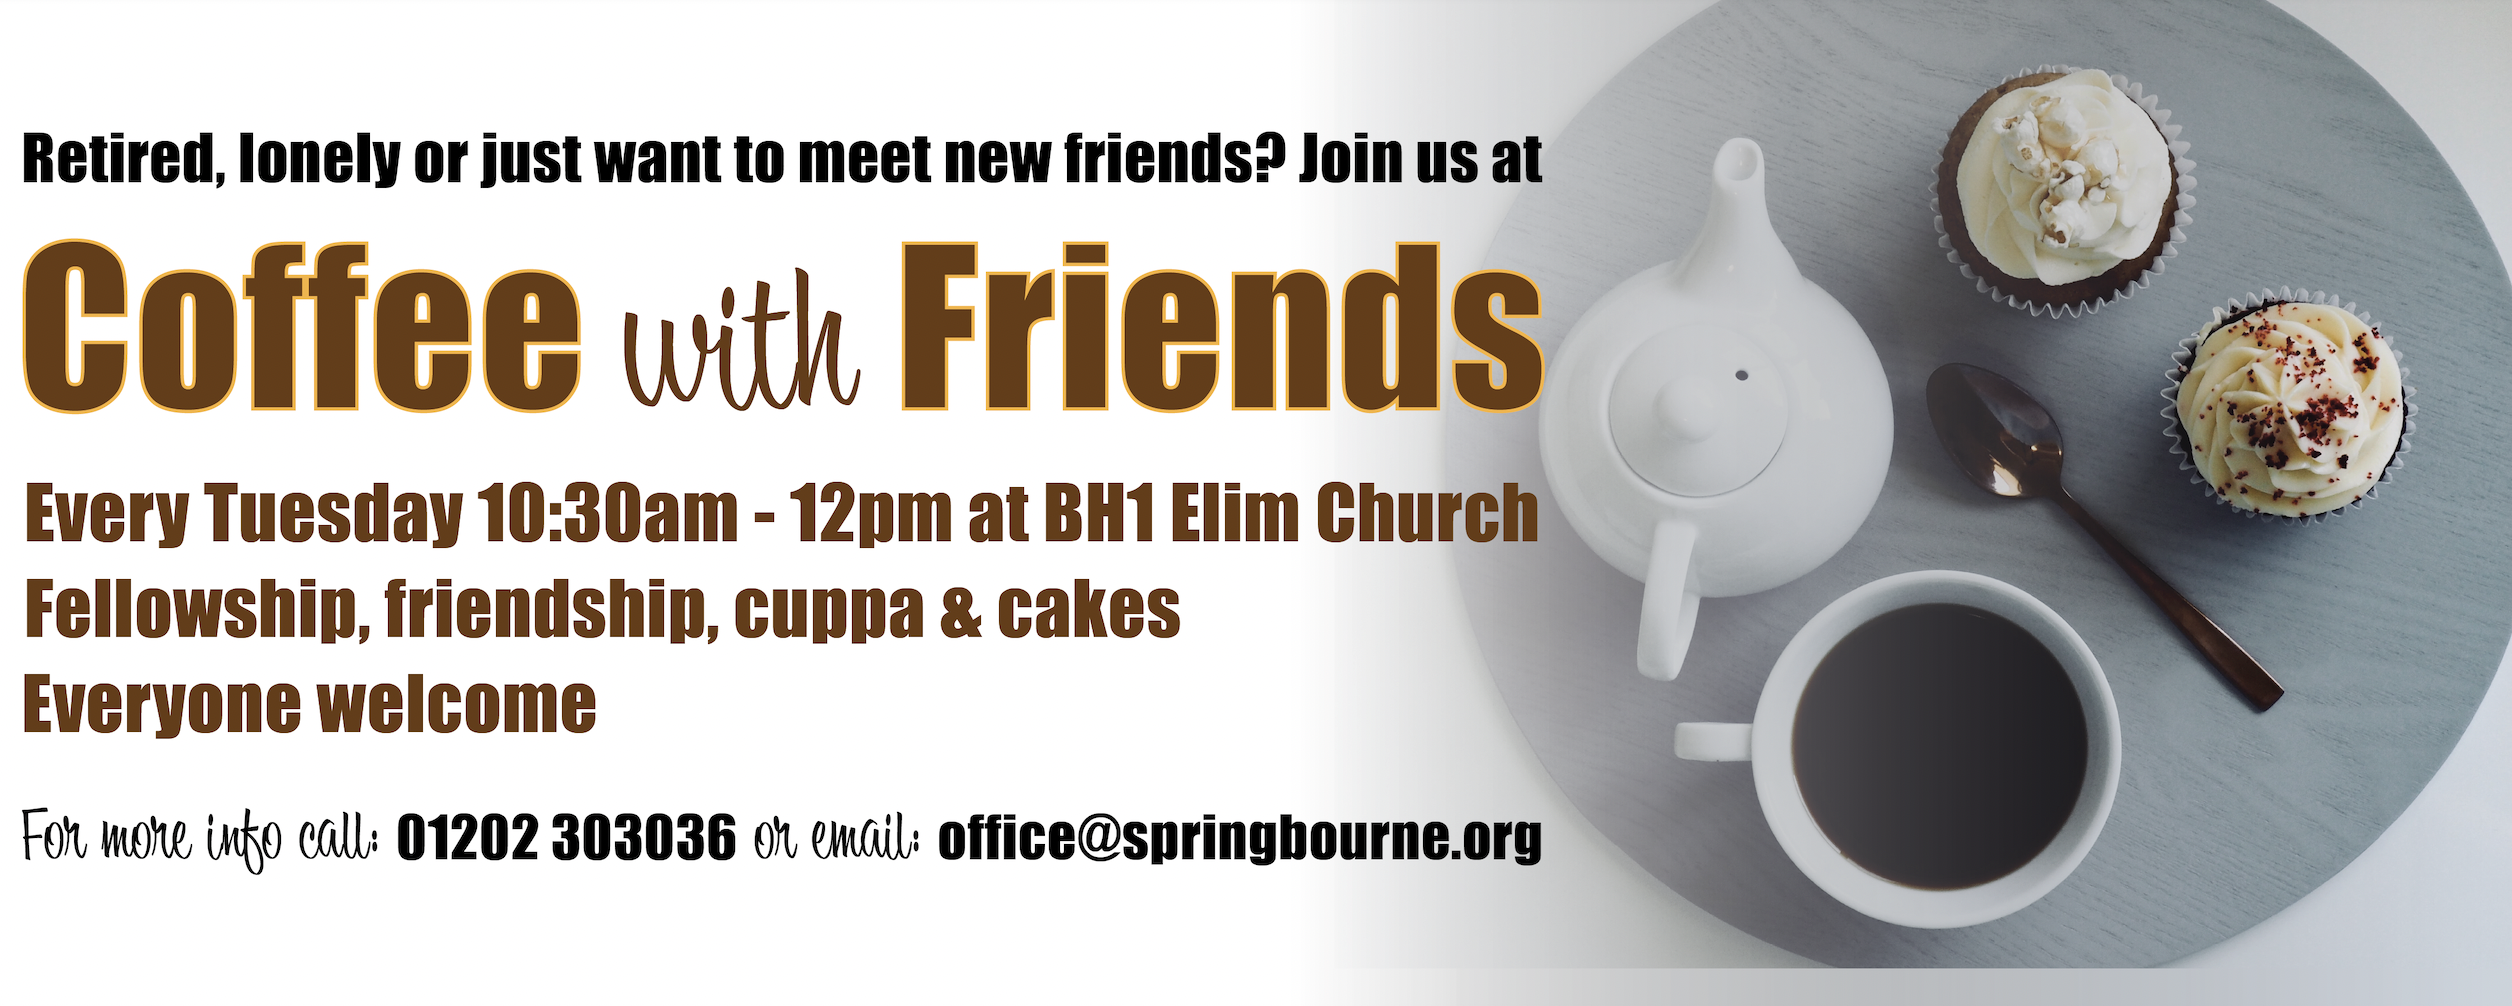 Coffee with friends at BH1 Elim Church